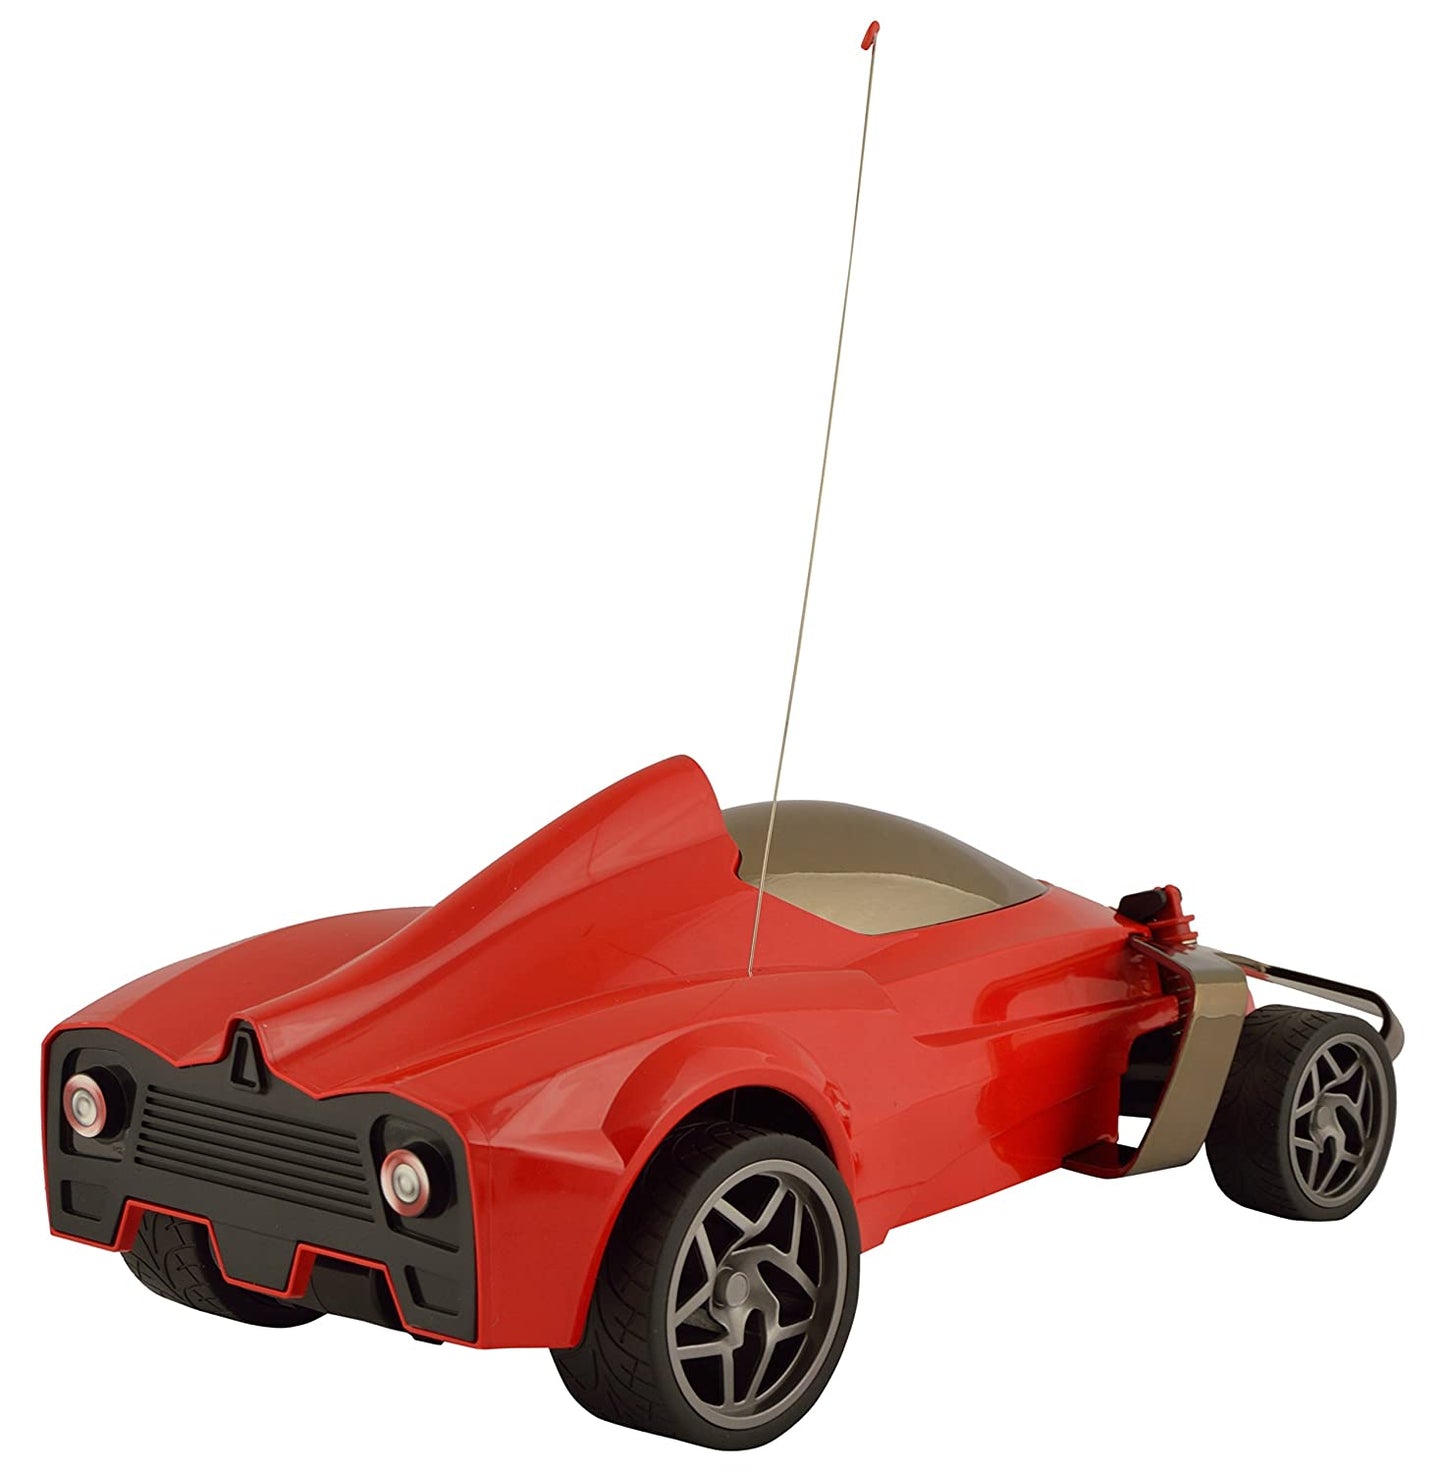 AZi Classic Modification DX Storm S Racing Remote Control (RC) Rechargeable Car with 27Mhz Frequency for Kids